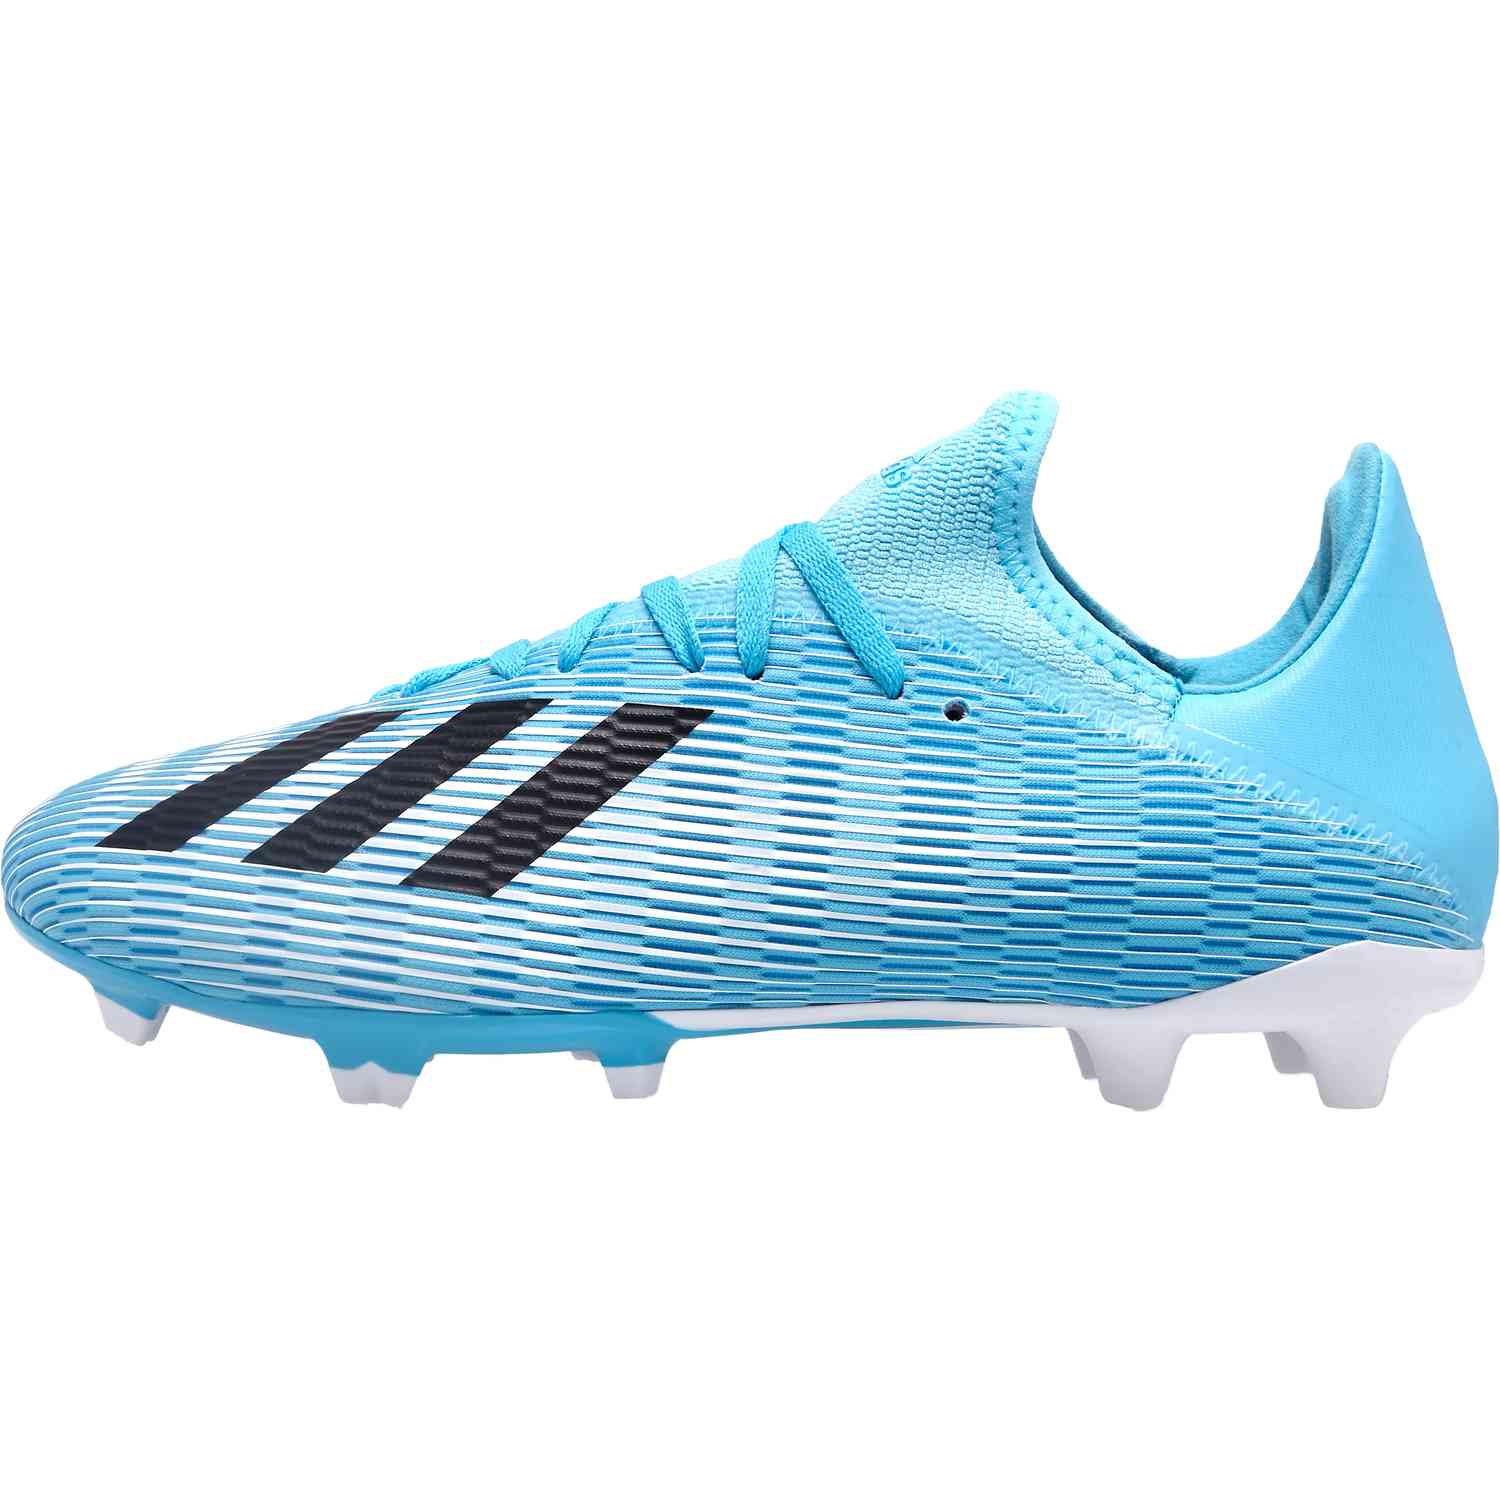 adidas x 19.3 firm ground cleats